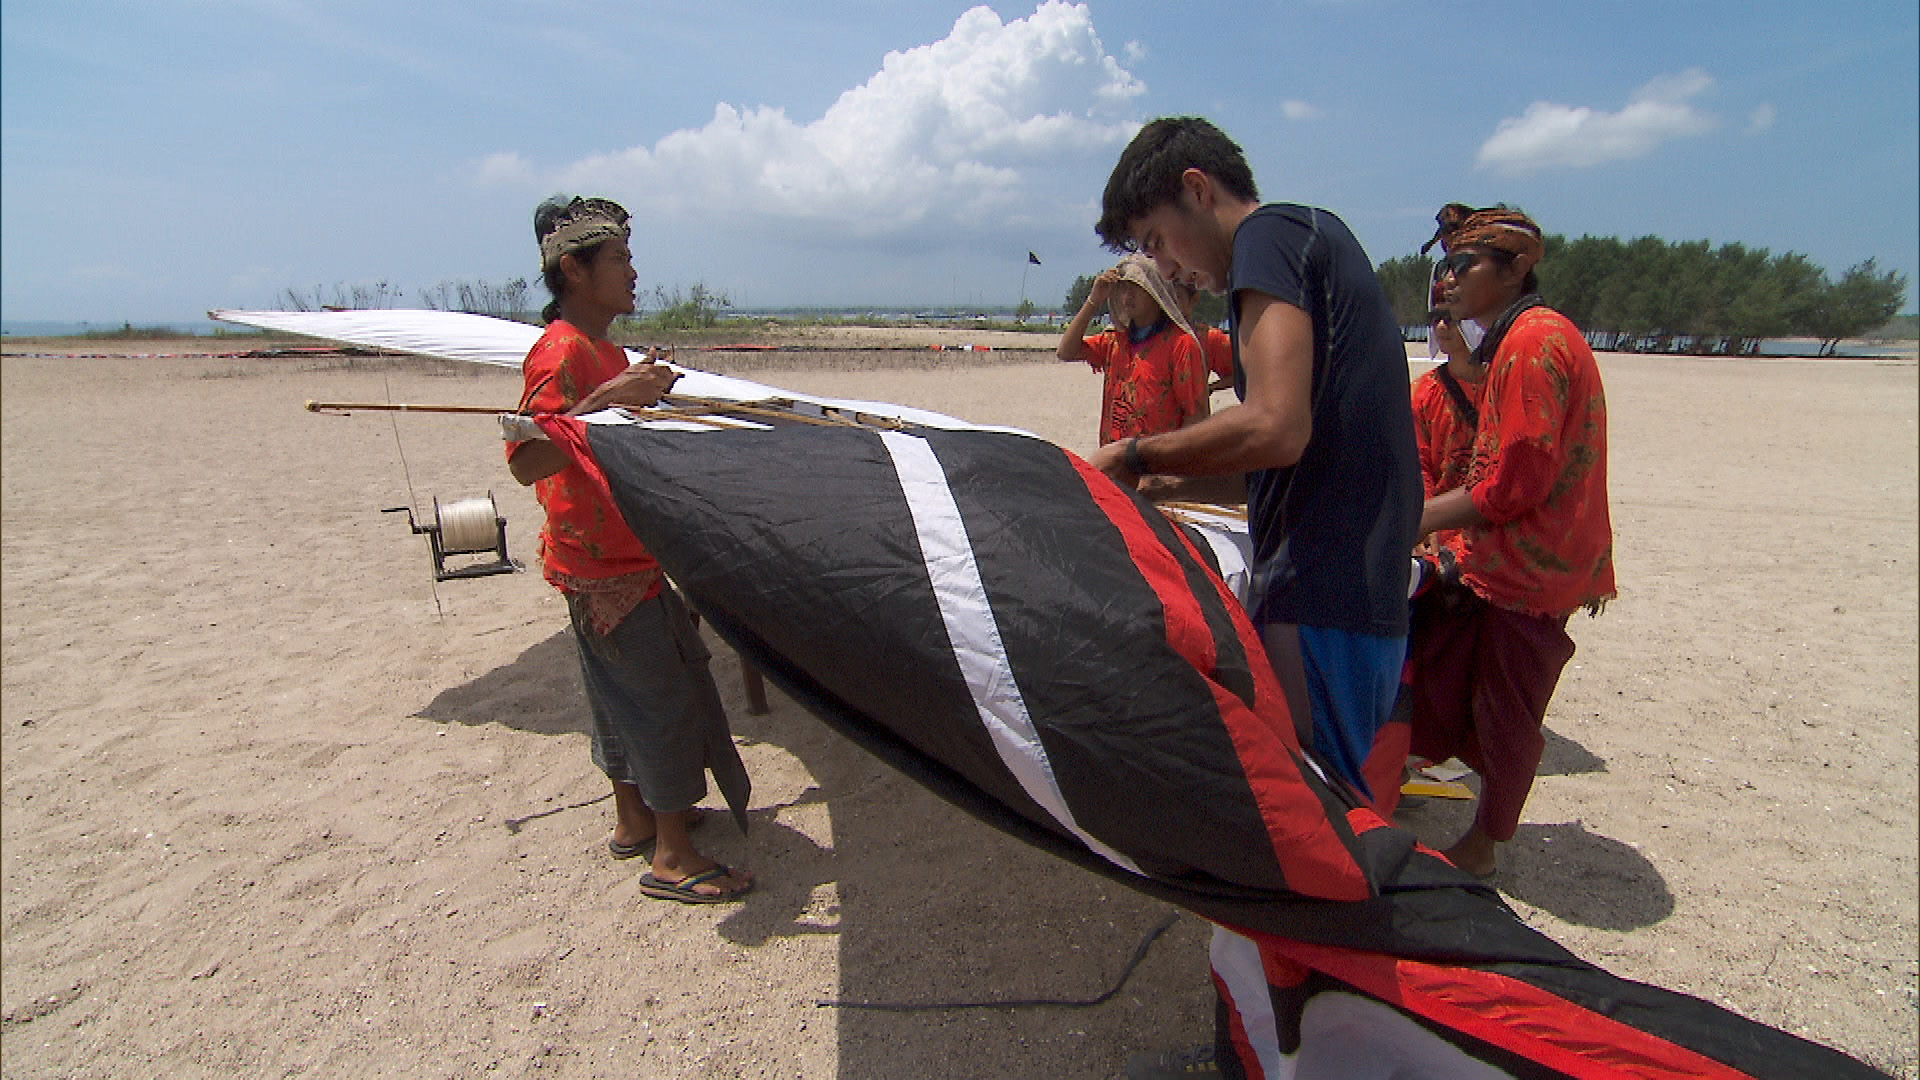 At the second Roadblock, Zach tries to help build and successfully fly a kite.